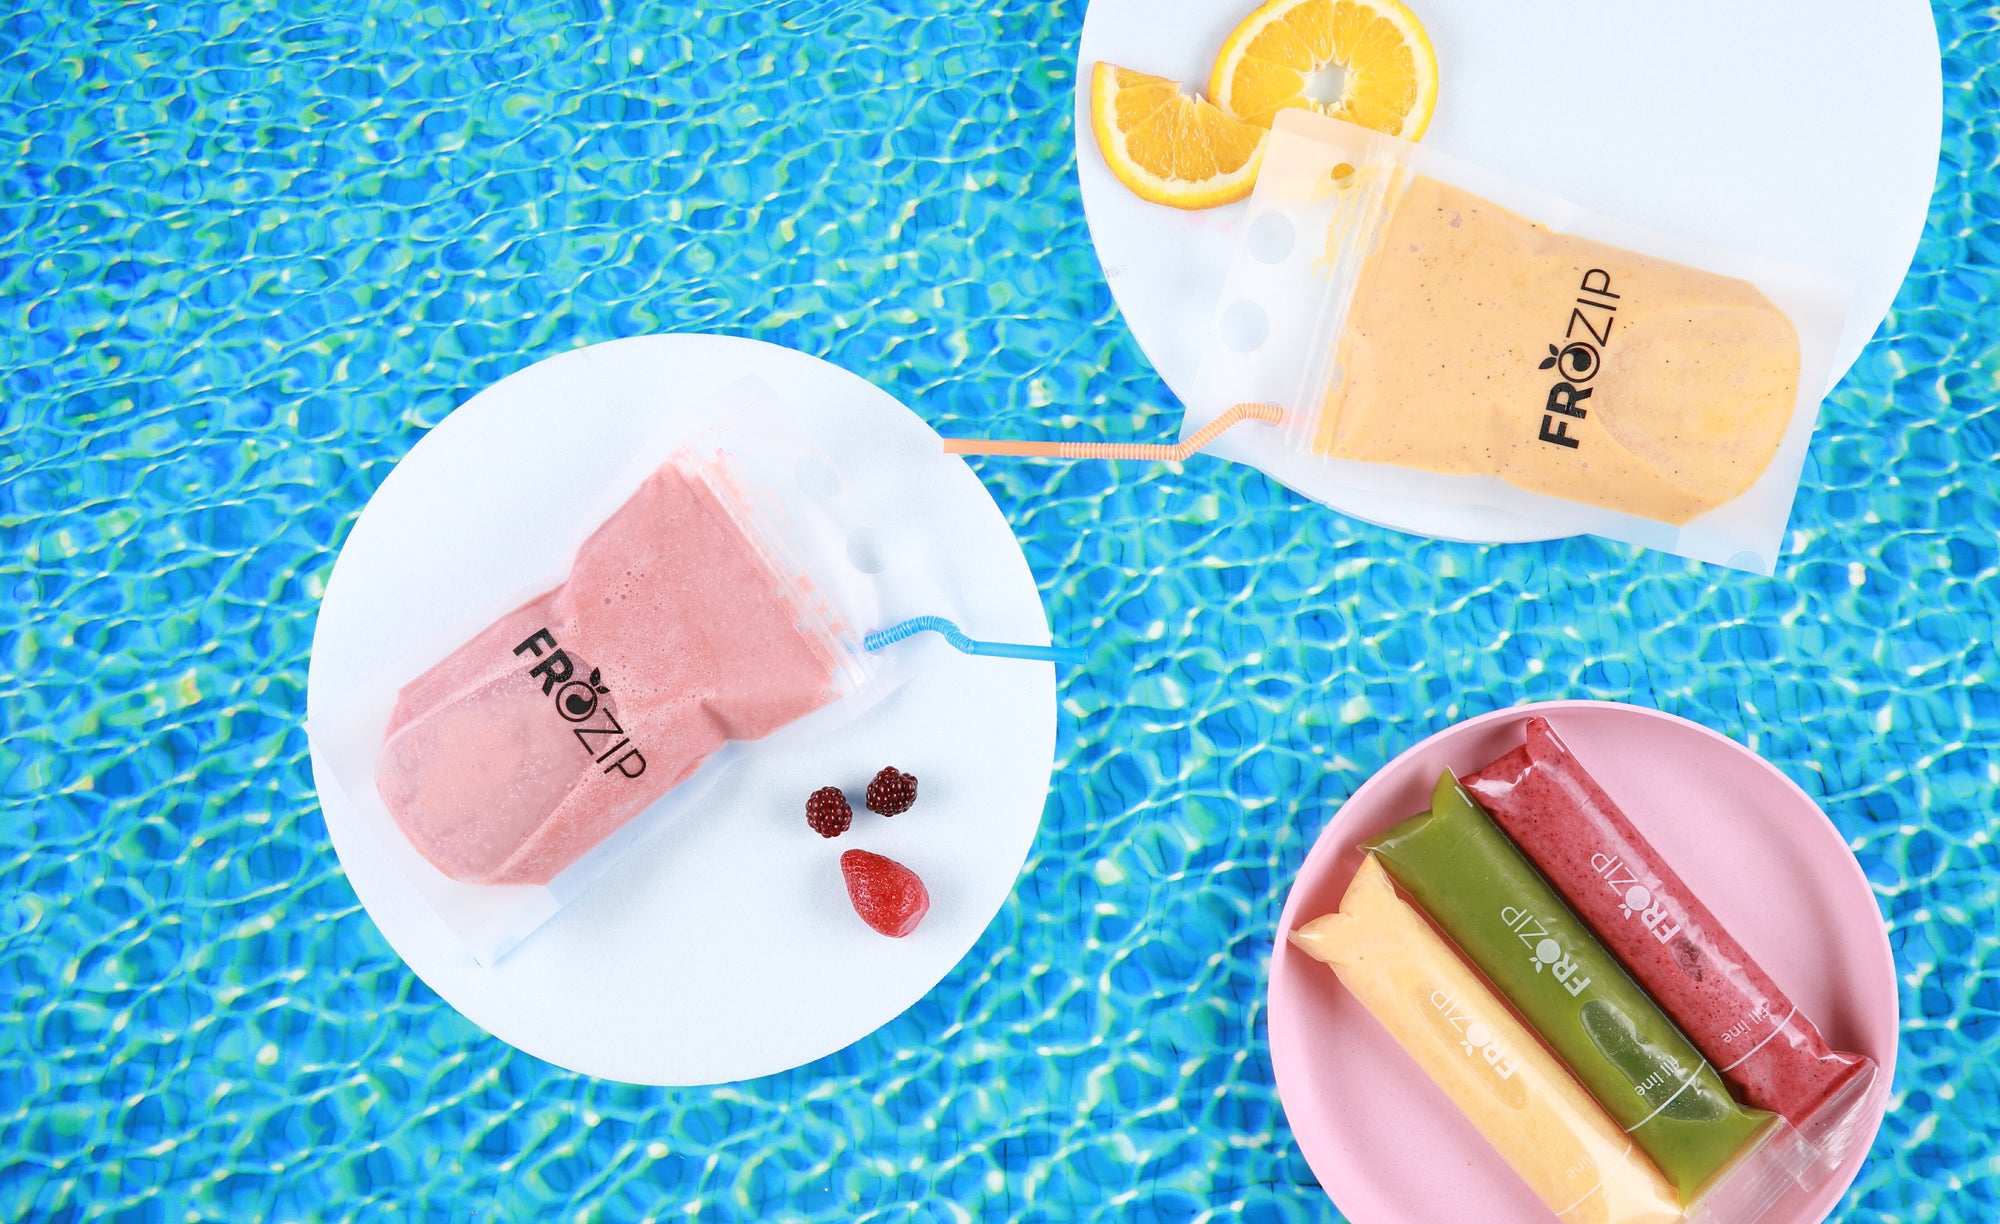 Money Fun for Everyone (Even Kids!) How to Make Your Own Popsicle Stand